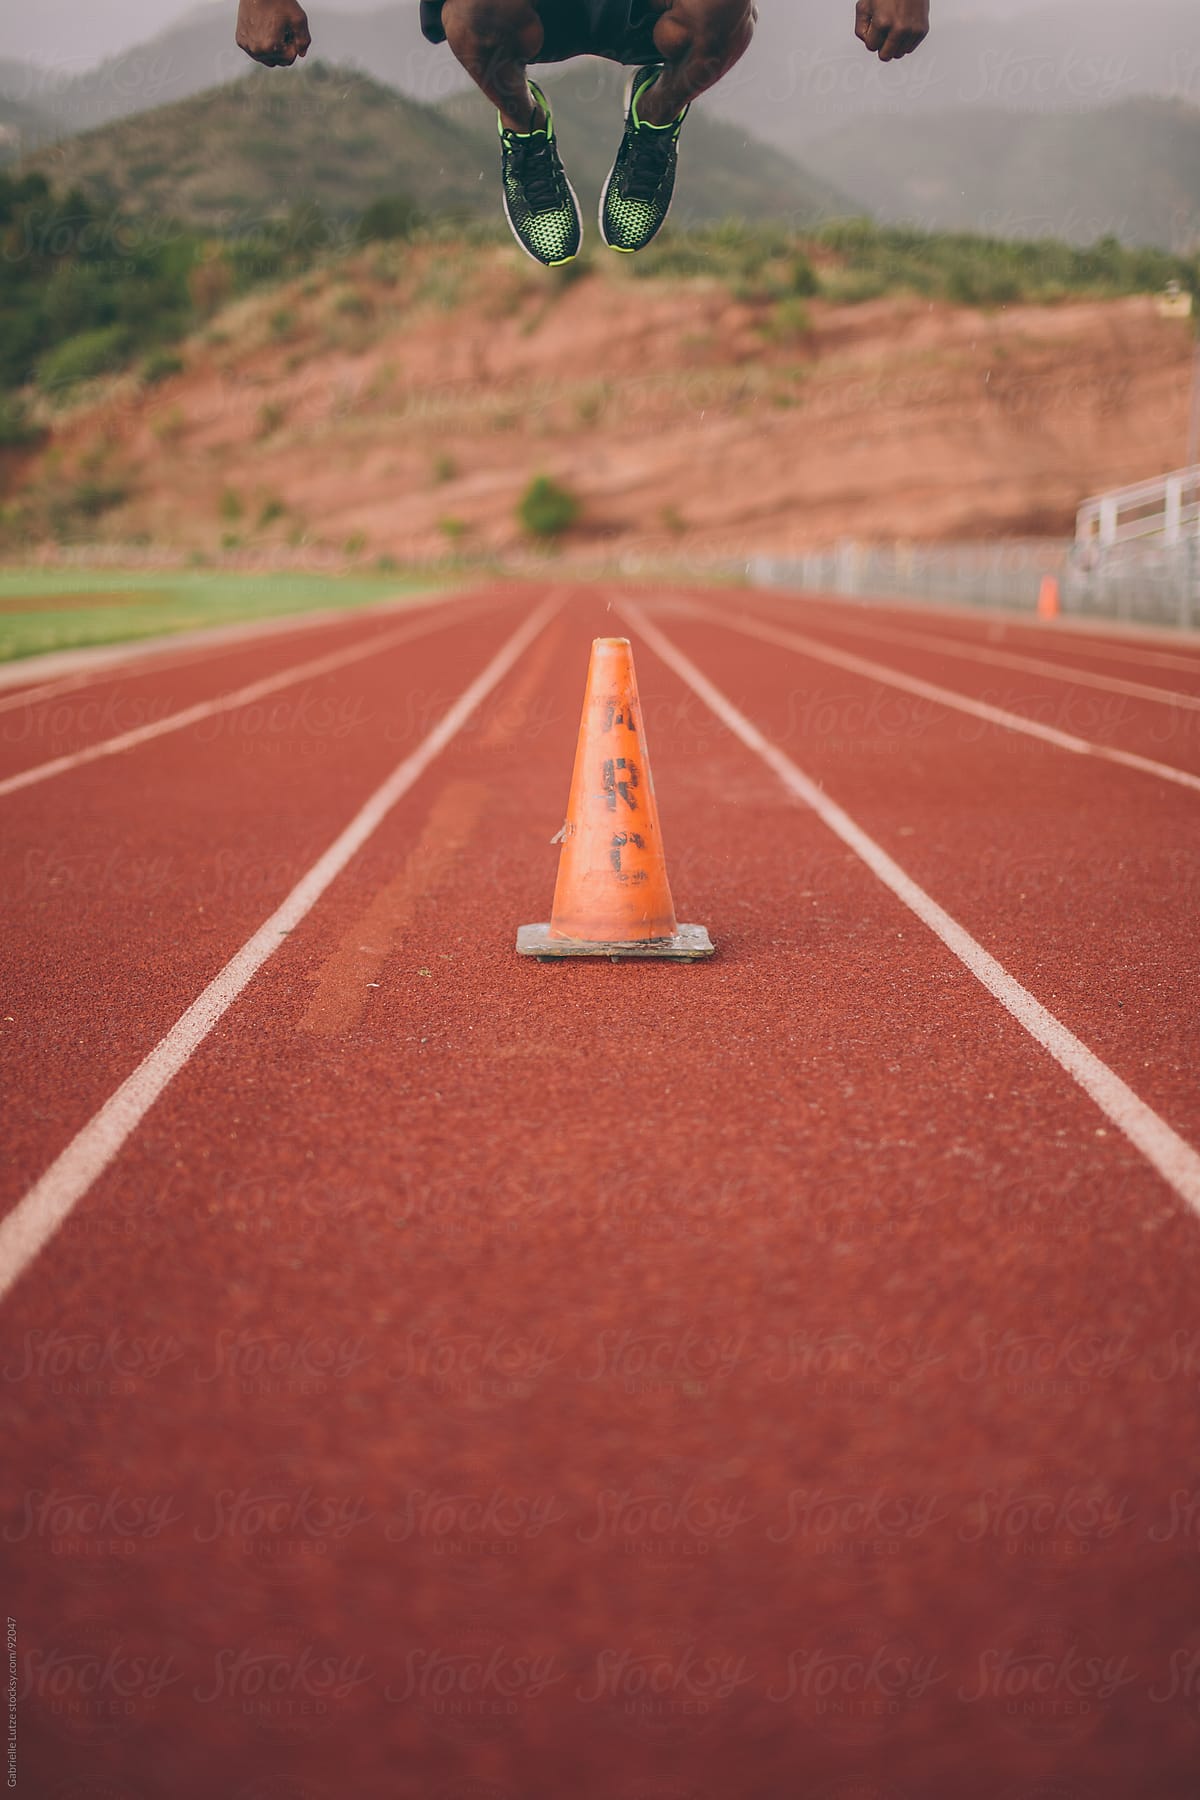 Black guy jumping over an orange cone on a track